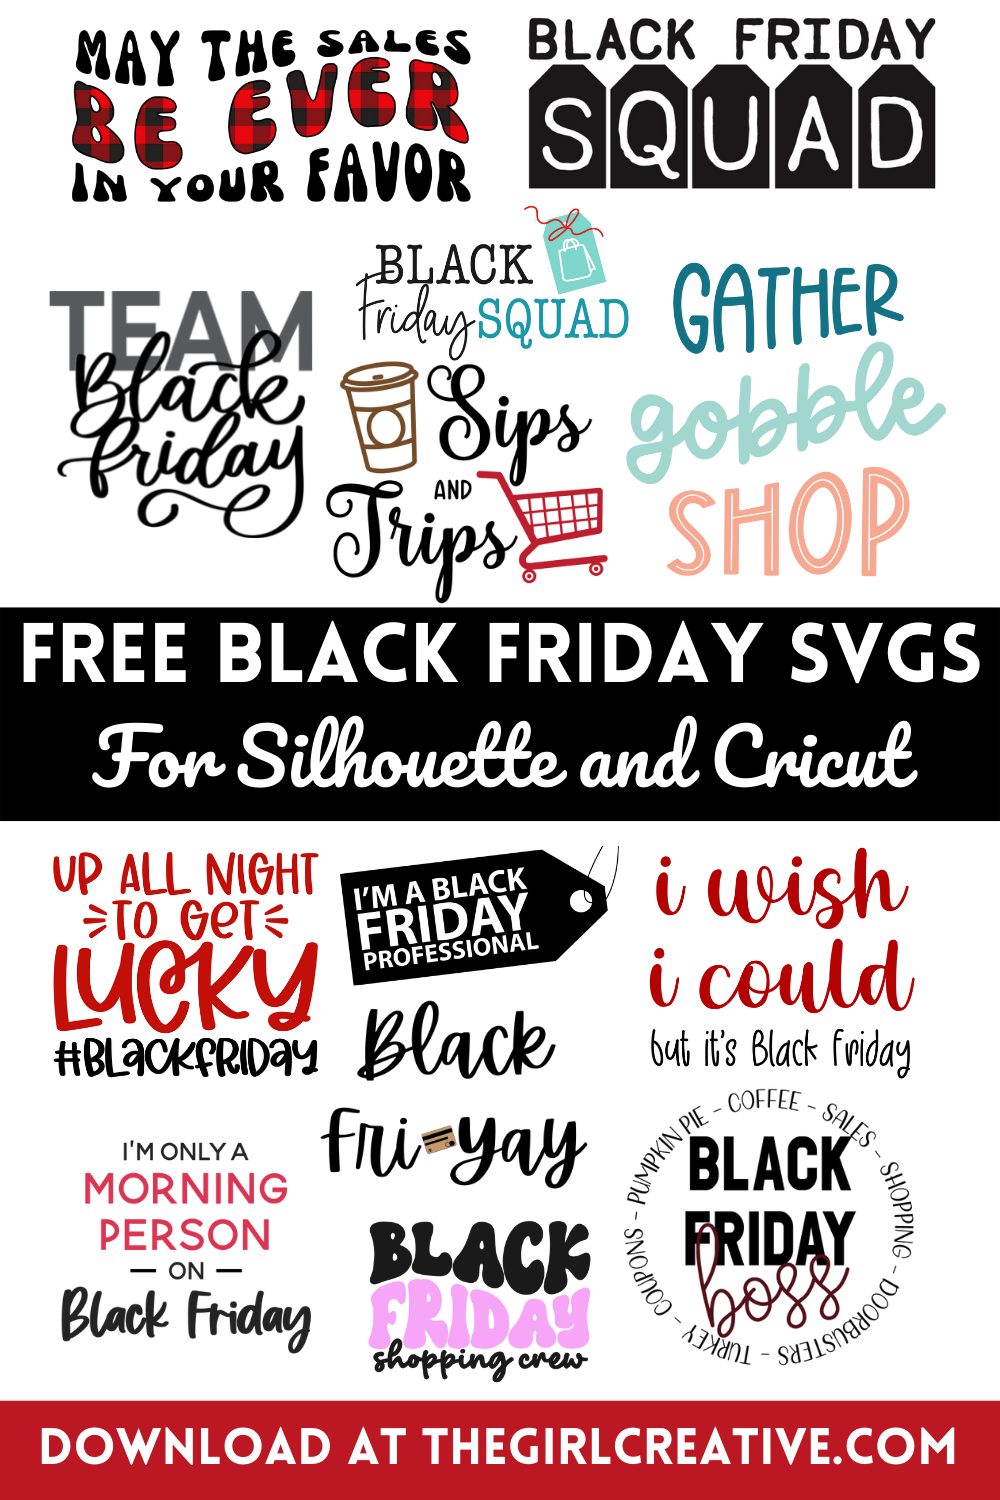 Black Friday SVGs for Shirts